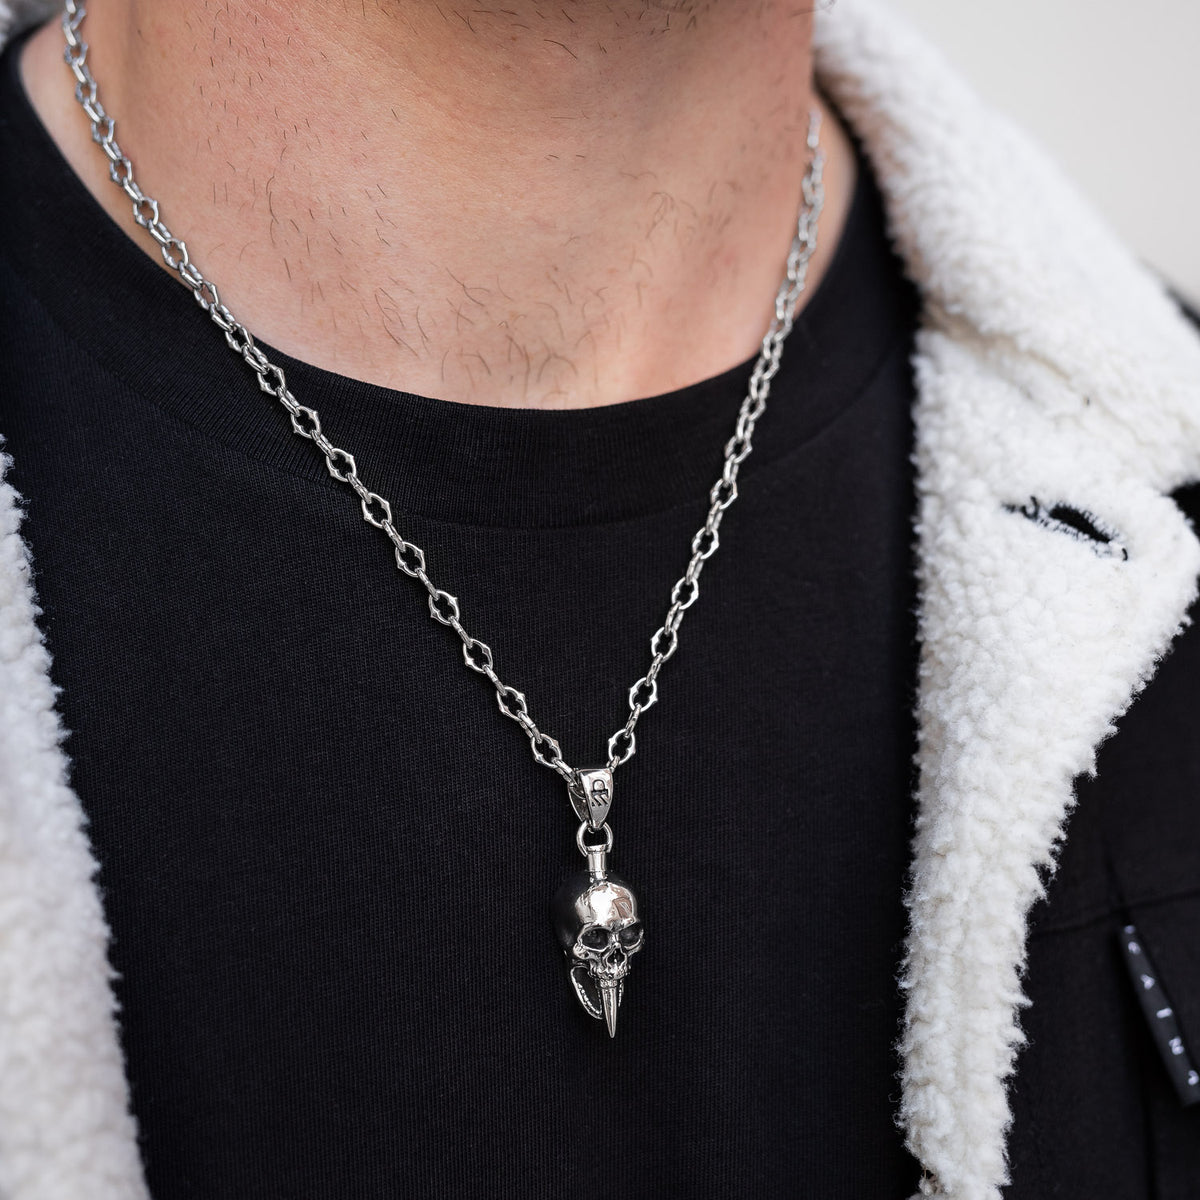 silver skull necklace pendant by statement collective